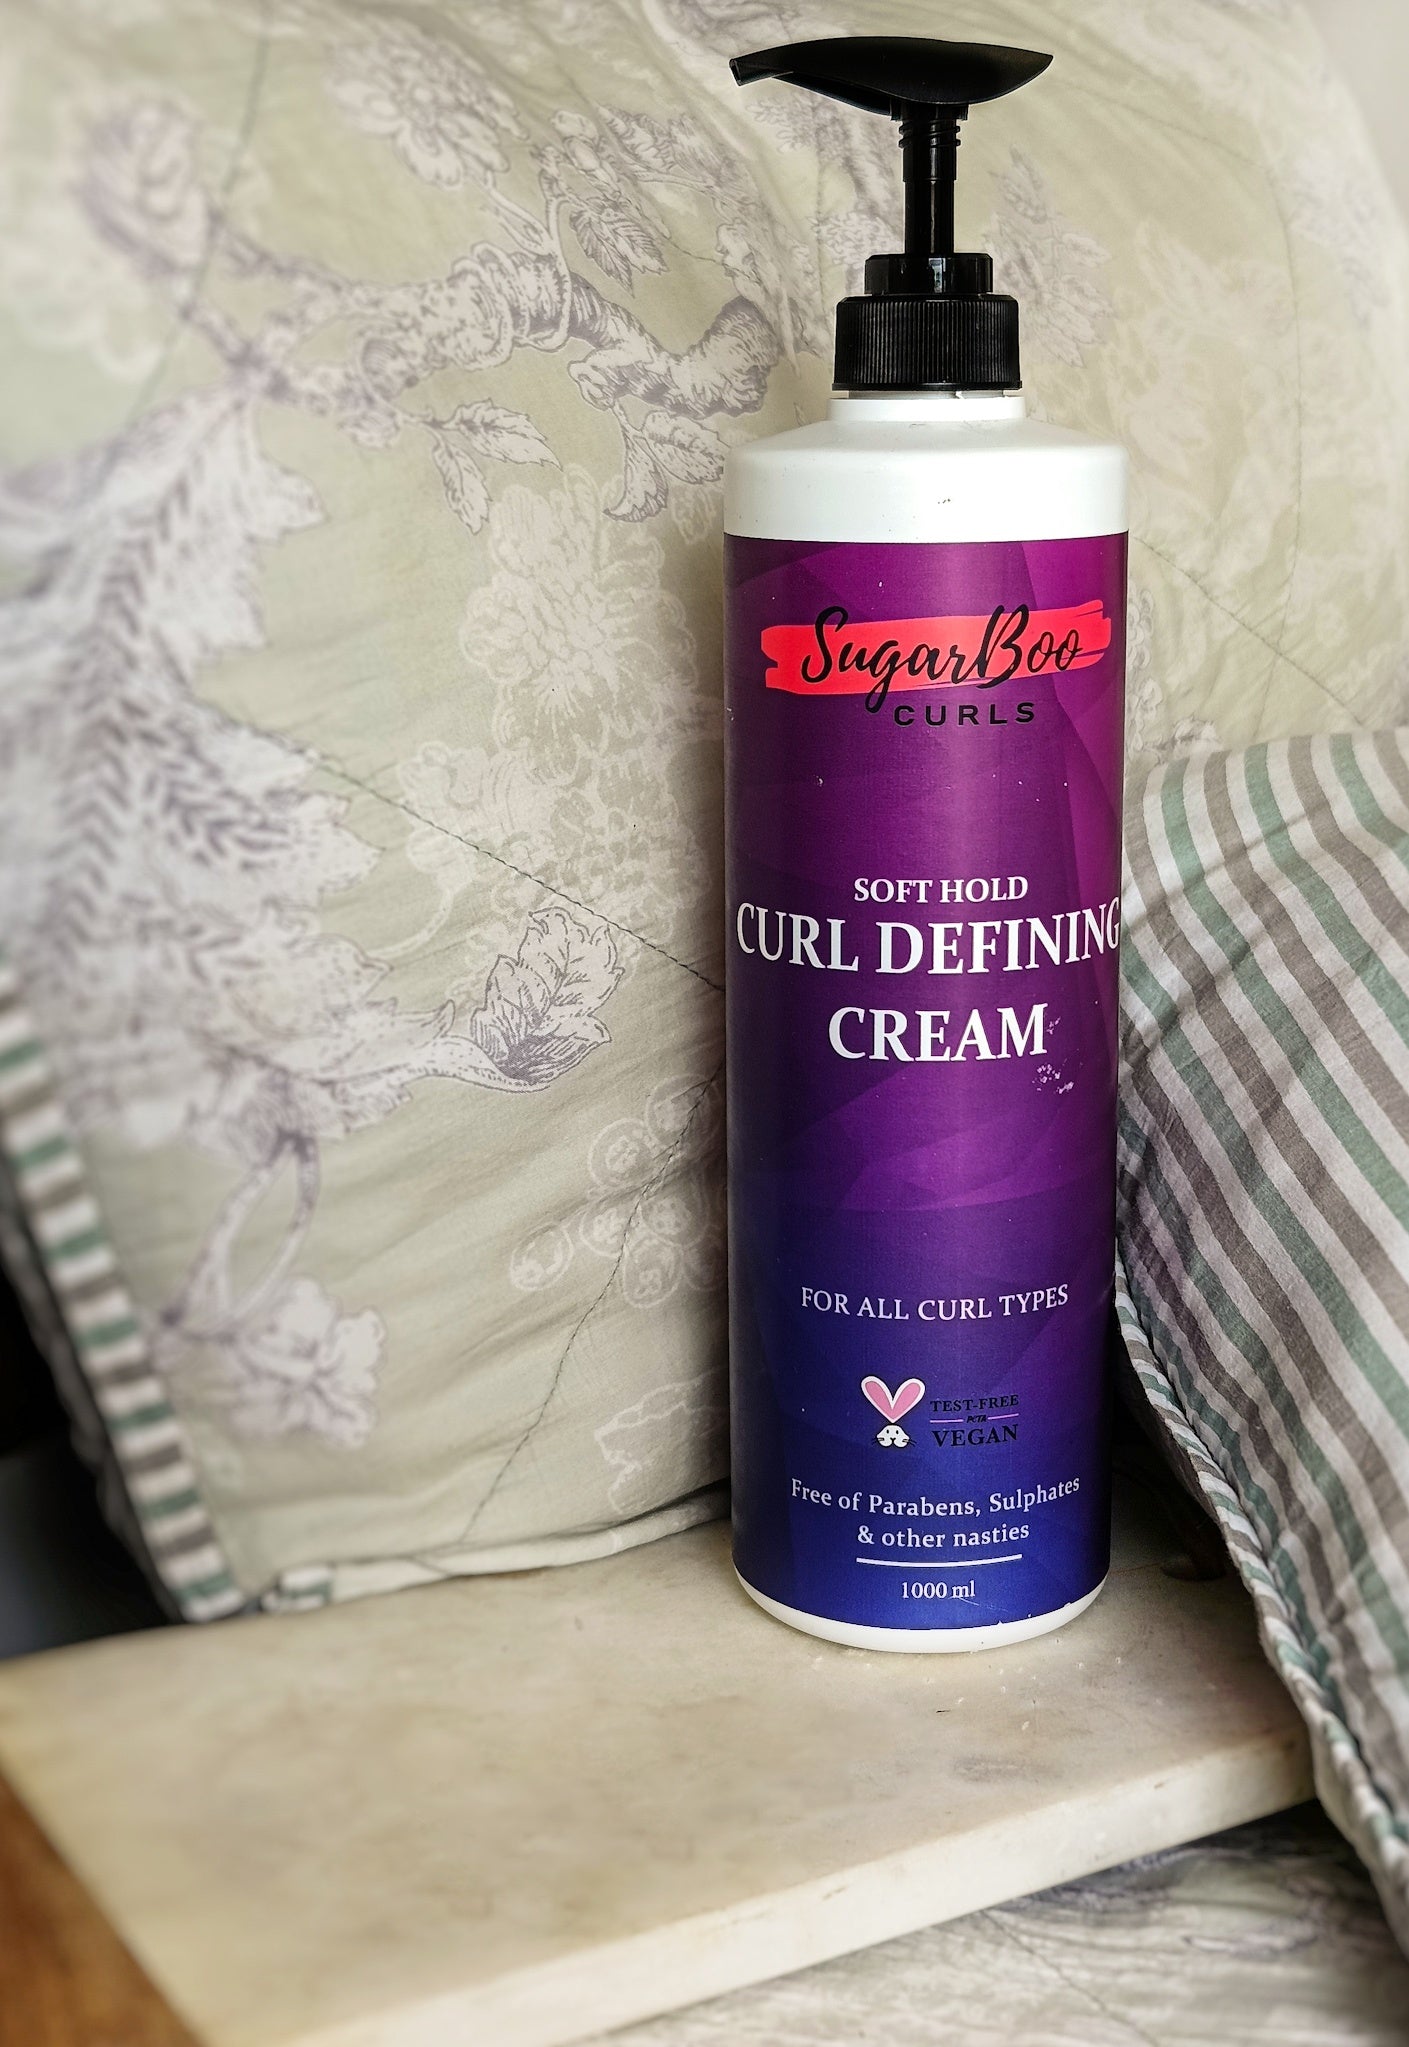 Soft Hold Curl Defining Cream 1 Litre (1000ml)